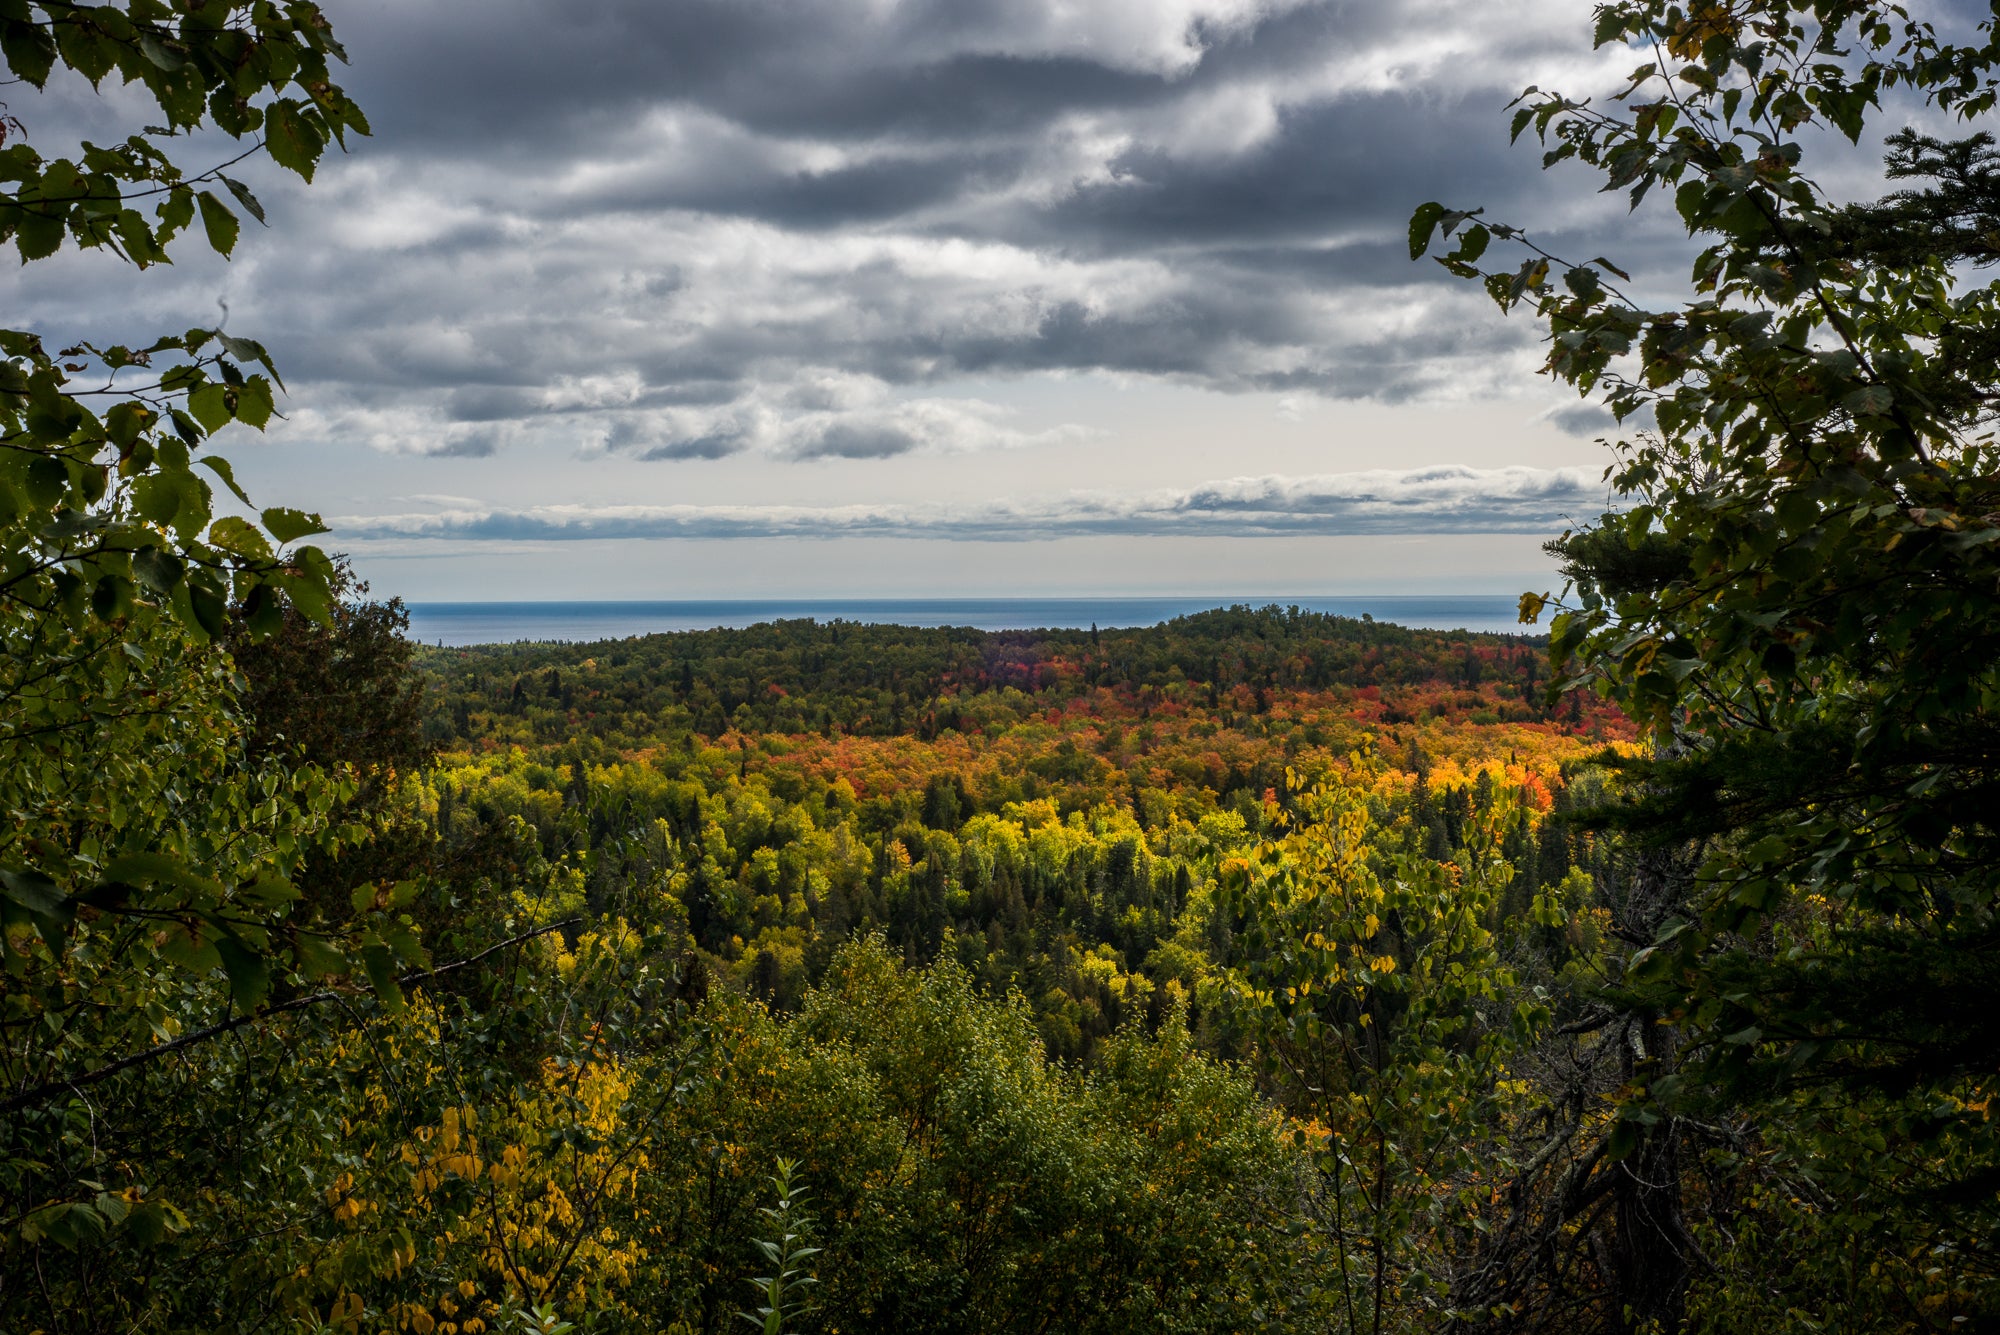 Overlook on the Cedar Ridge Trail, Lake Superior in the background